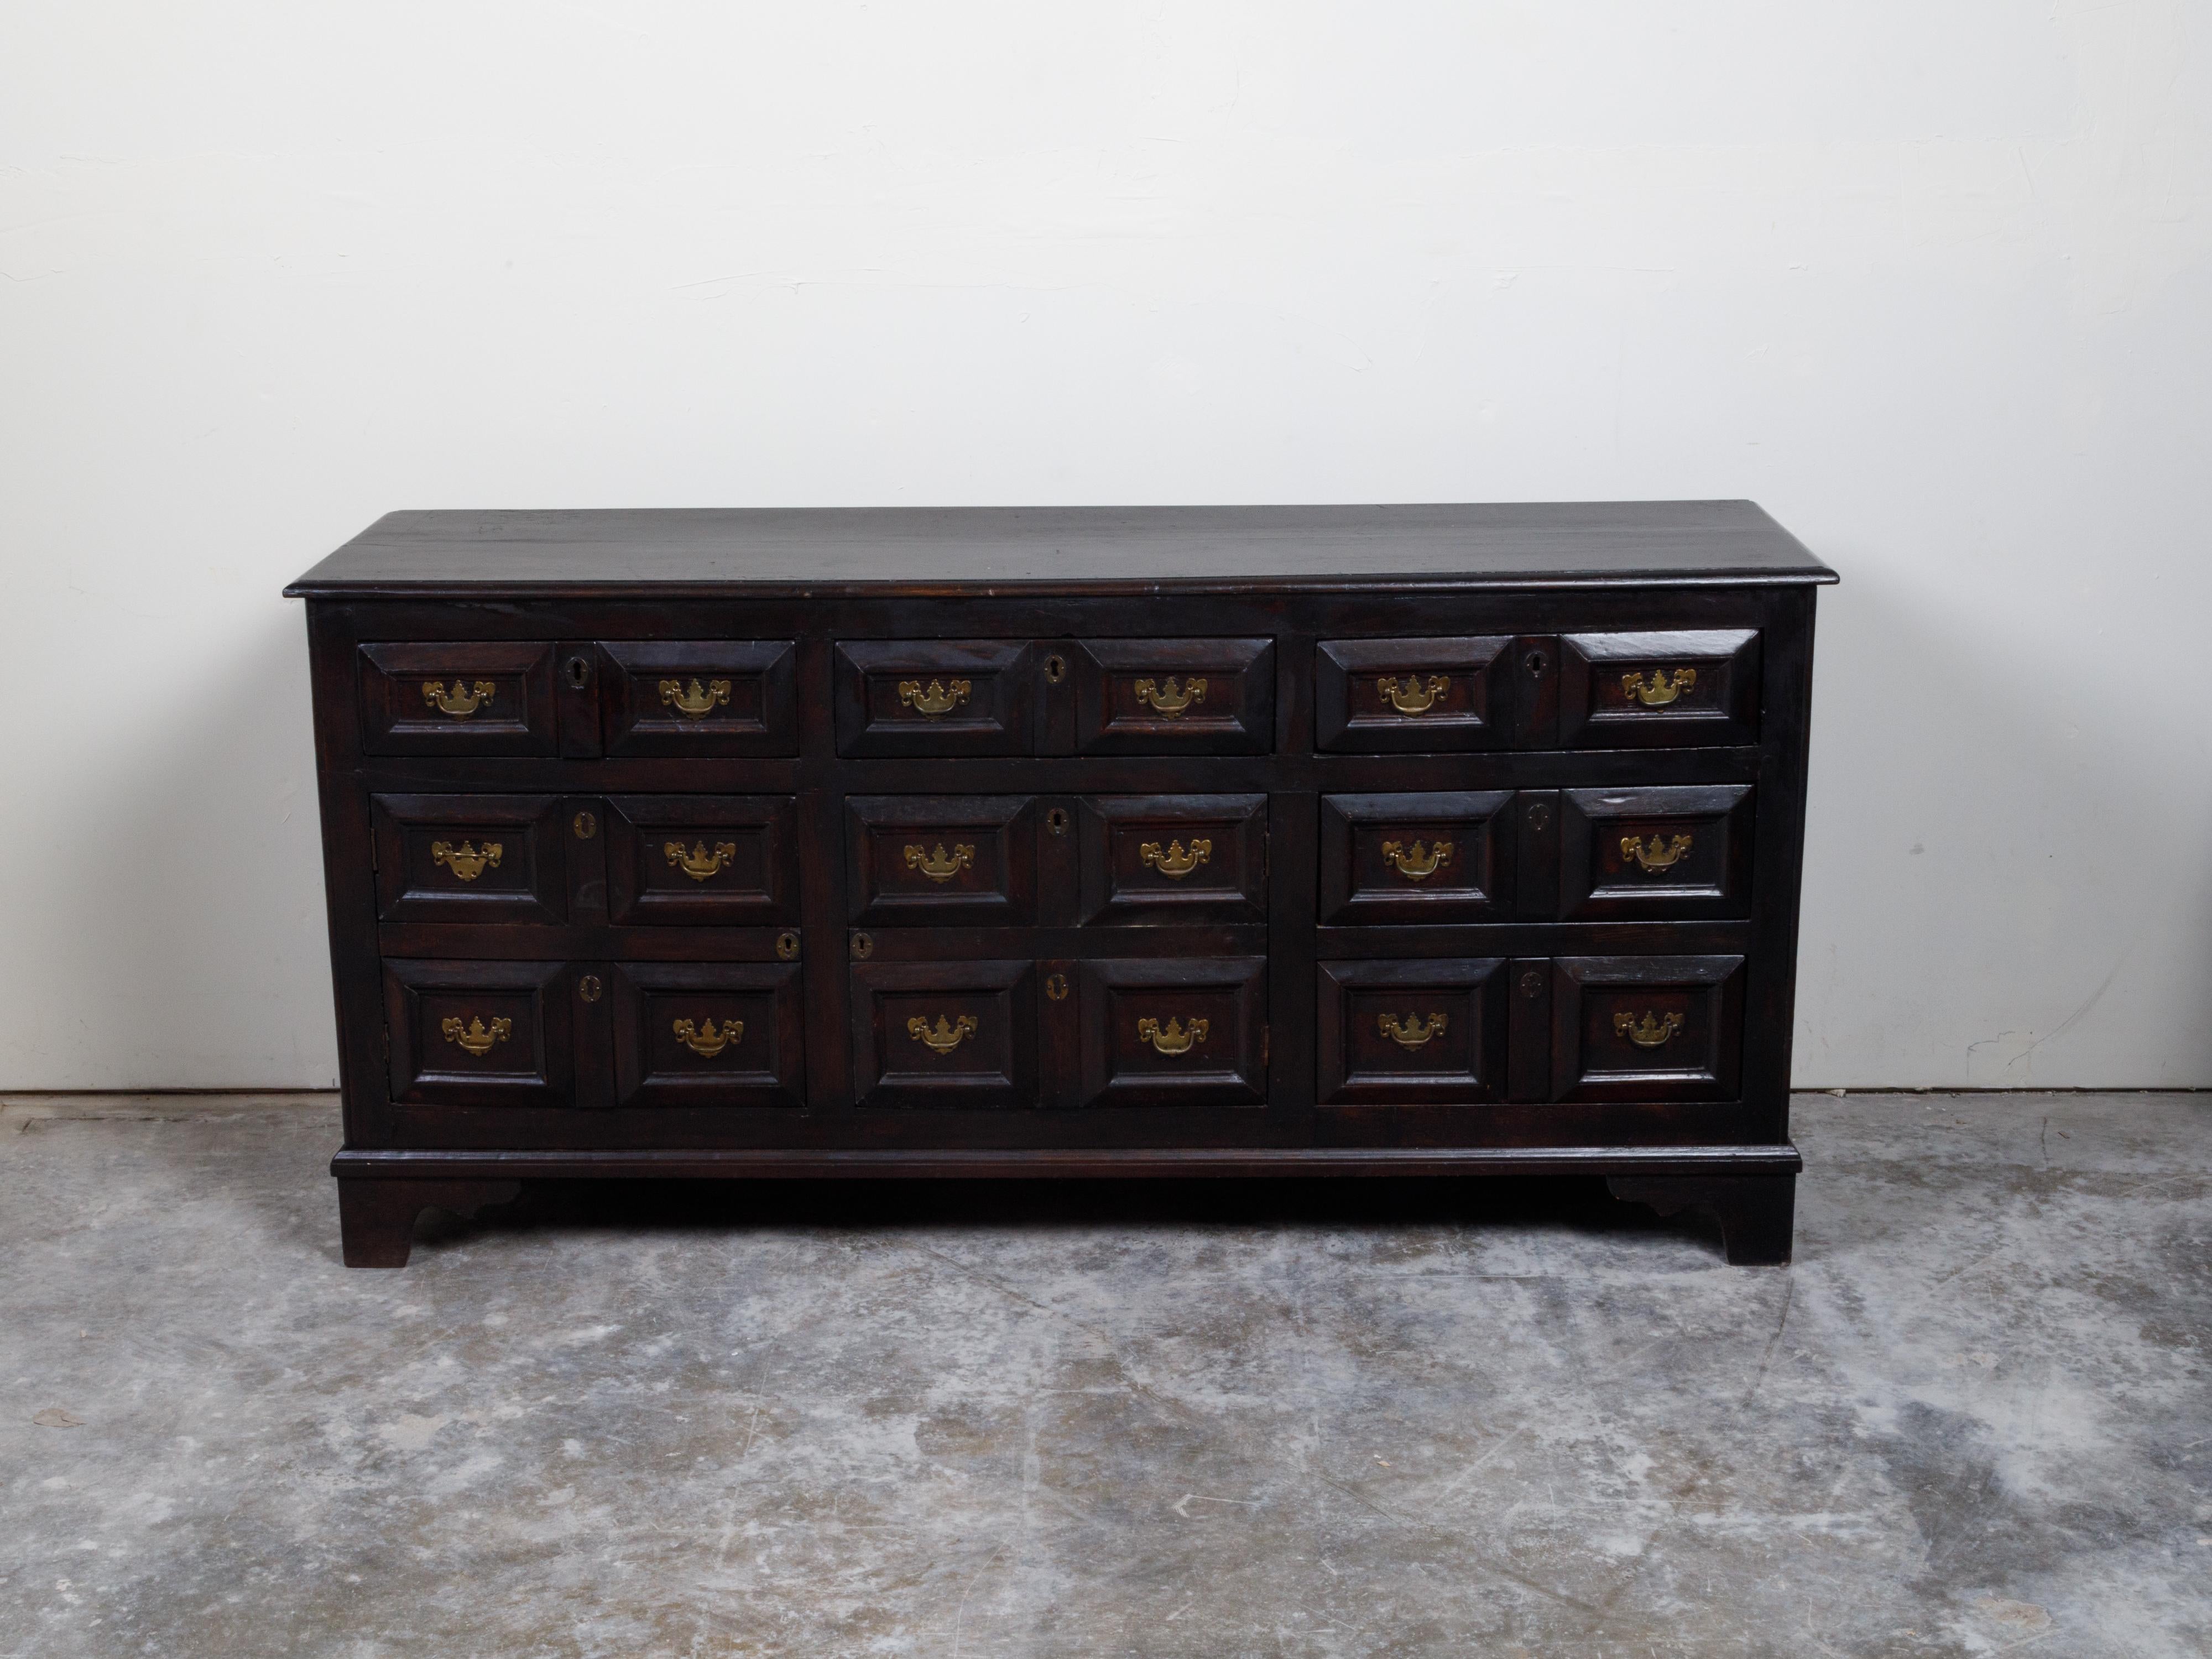 An English ebonized wood buffet from the 19th century, with doors and drawers. Created in England during the 19th century, this buffet features a rectangular top with beveled edges sitting above a perfectly organized combination of doors and